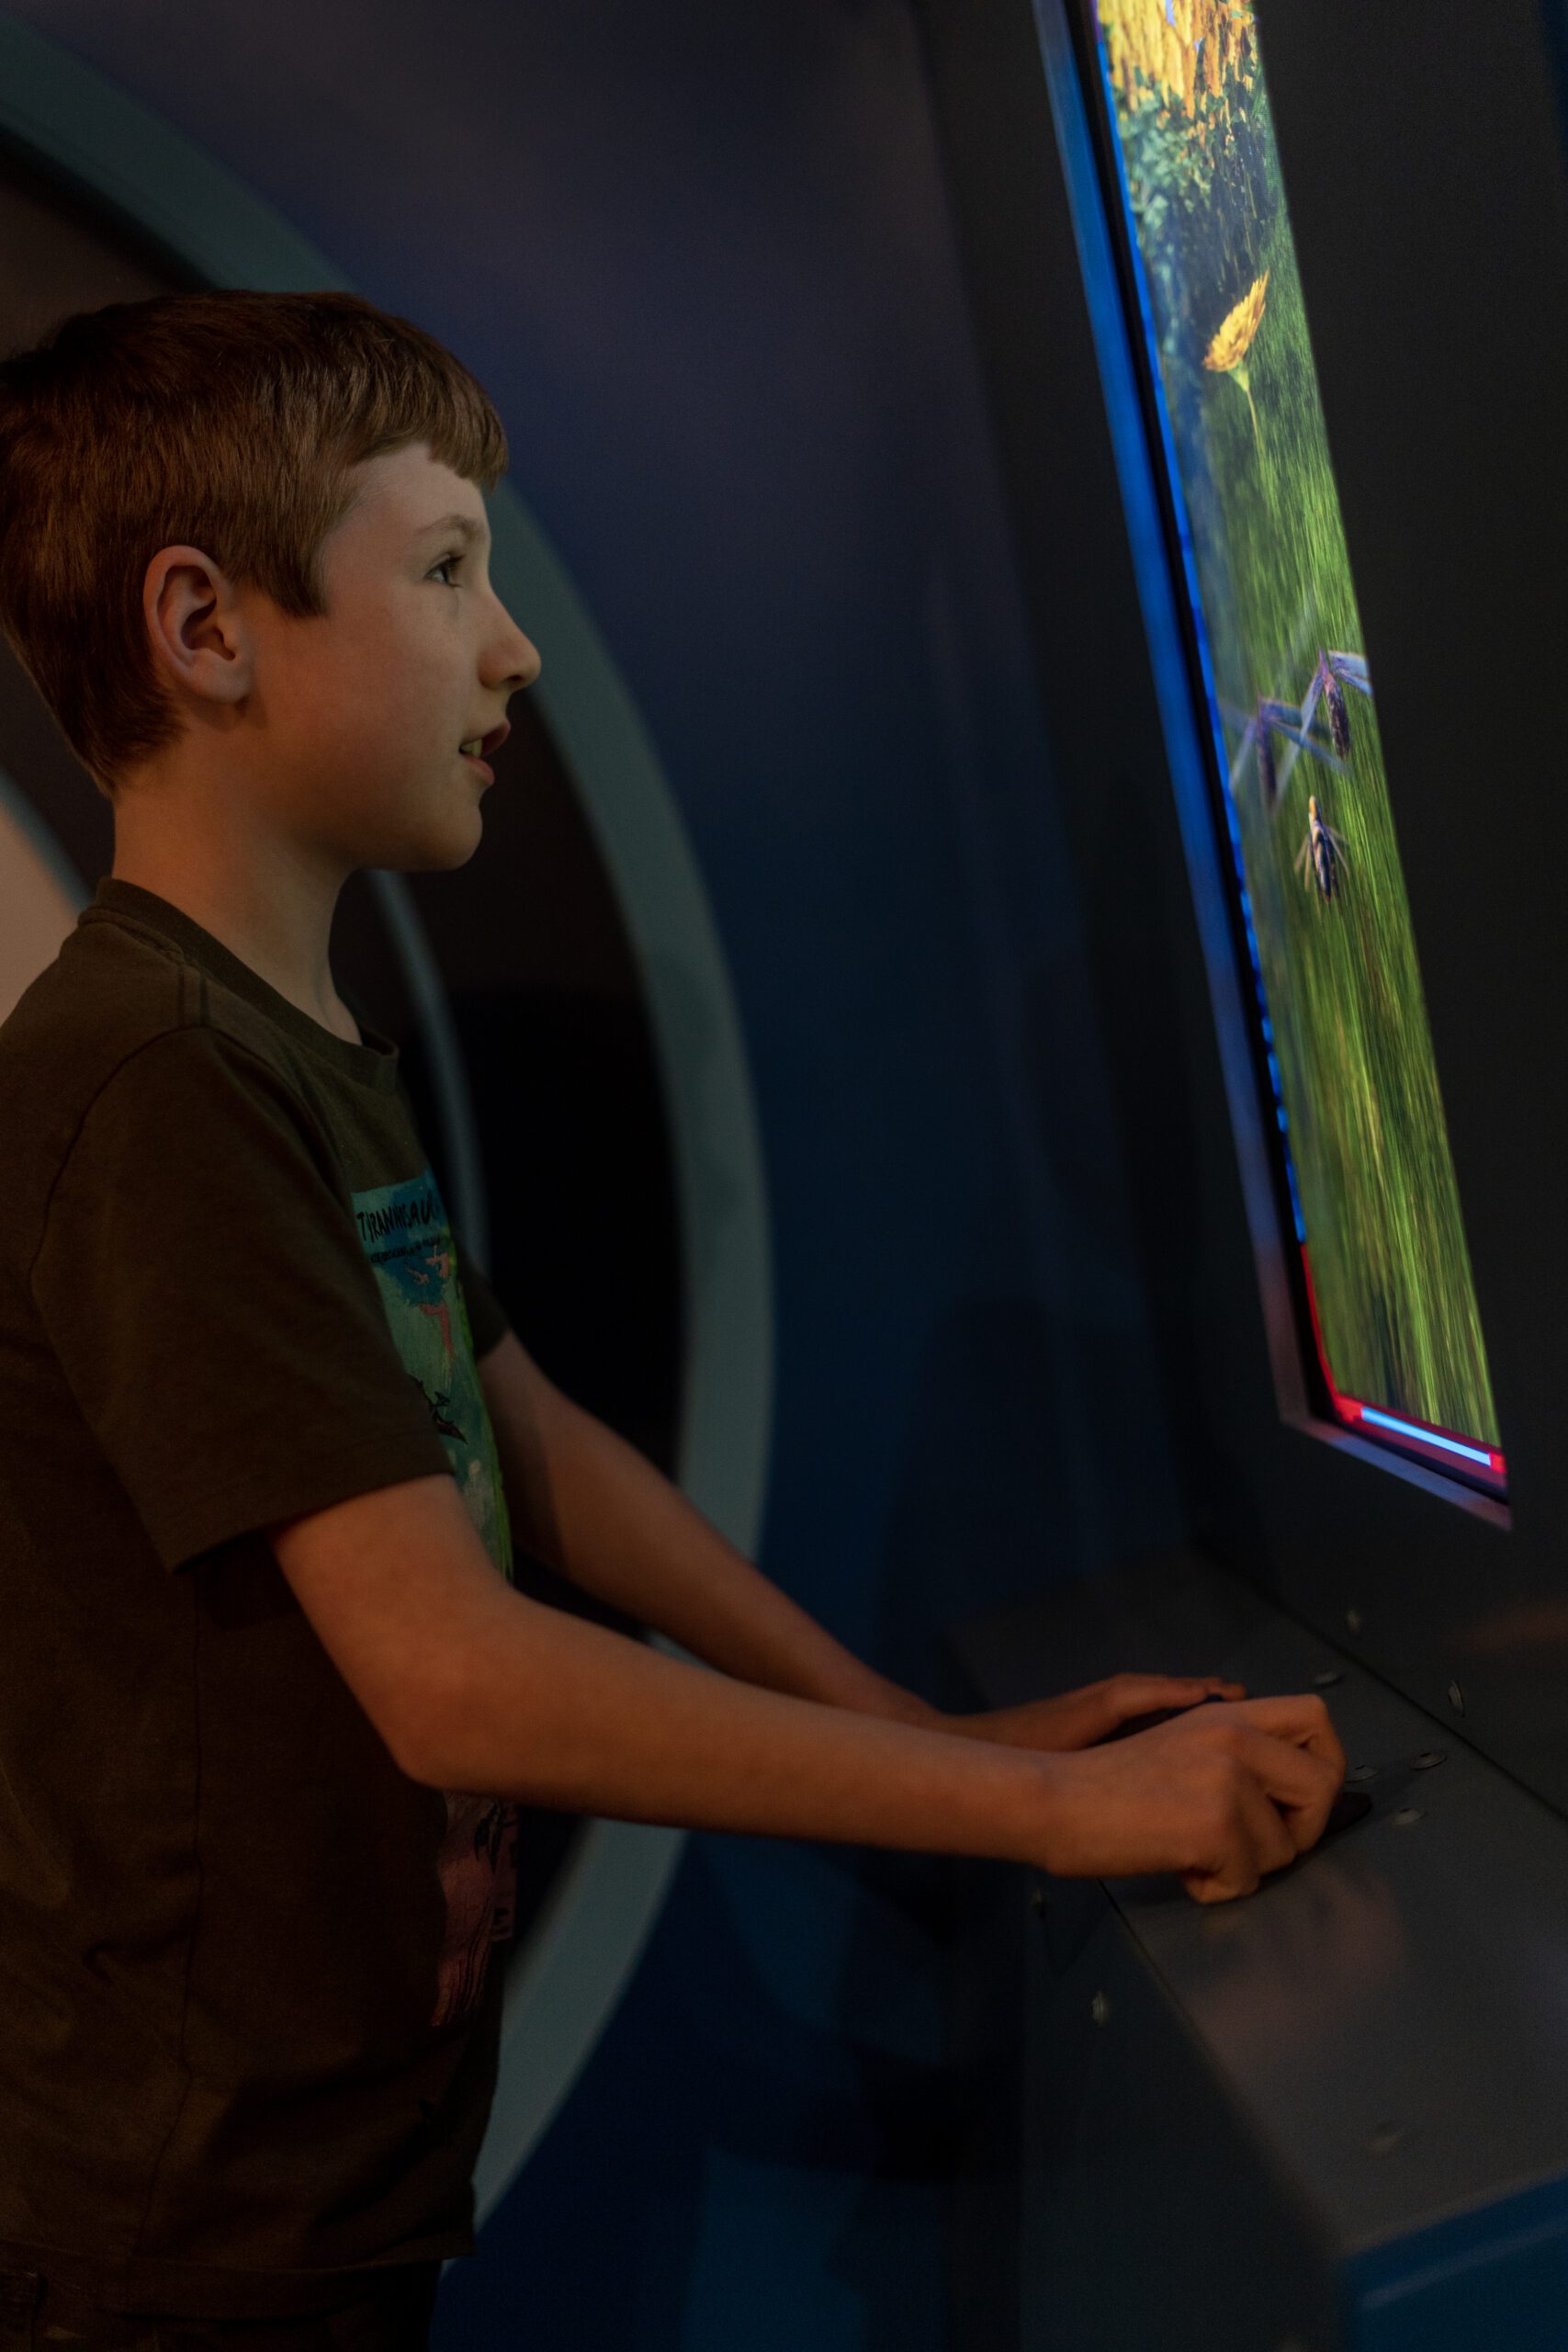 Emmett playing the "Be a Bee" game in new exhibit